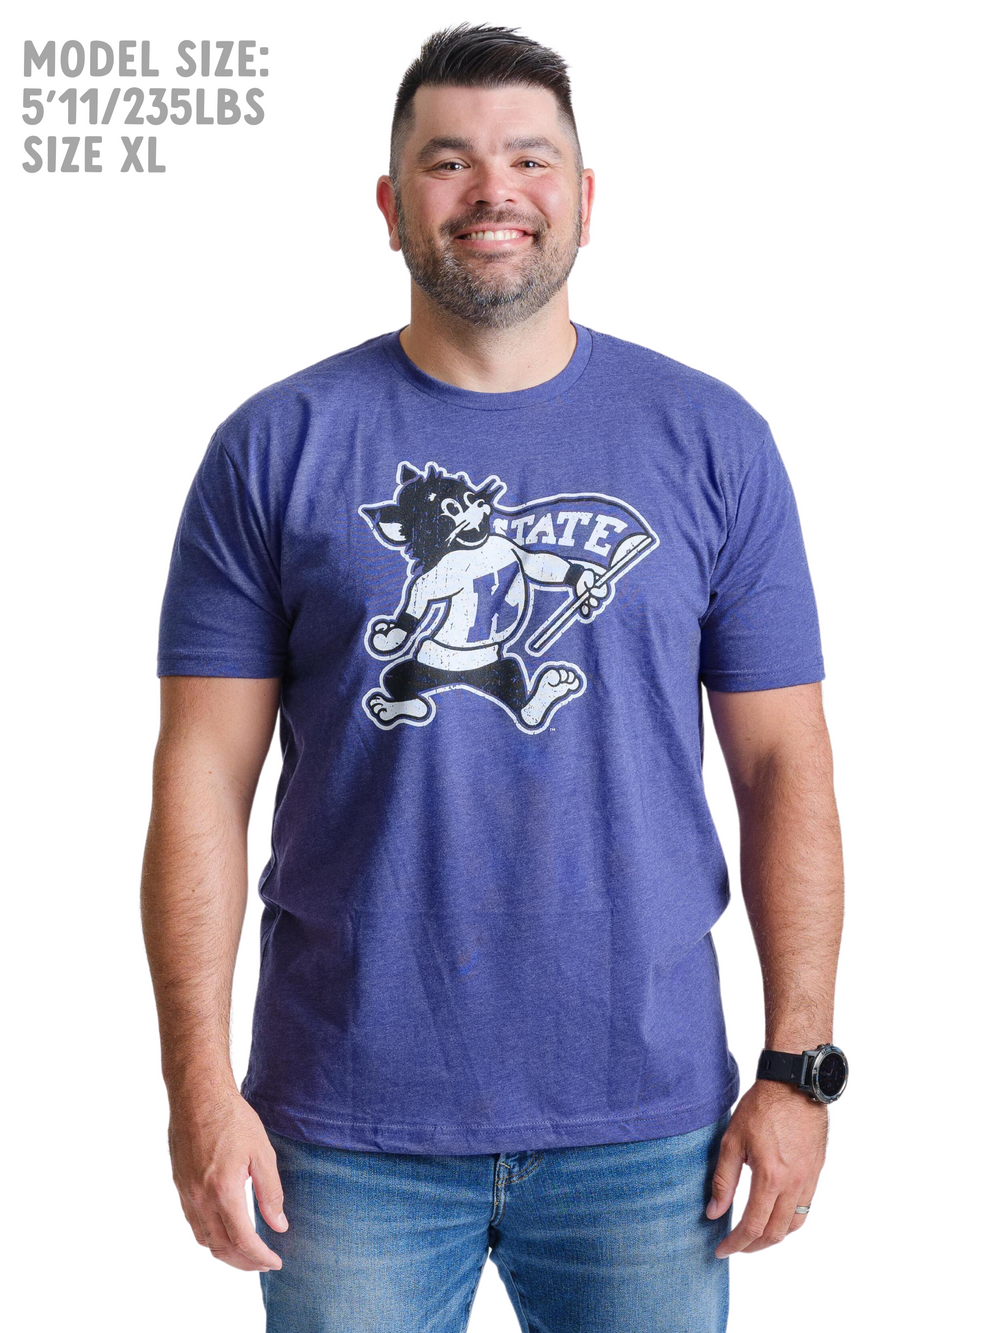 Vintage Kansas State Willie the Wildcat Shirt on Male Model from nudge printing